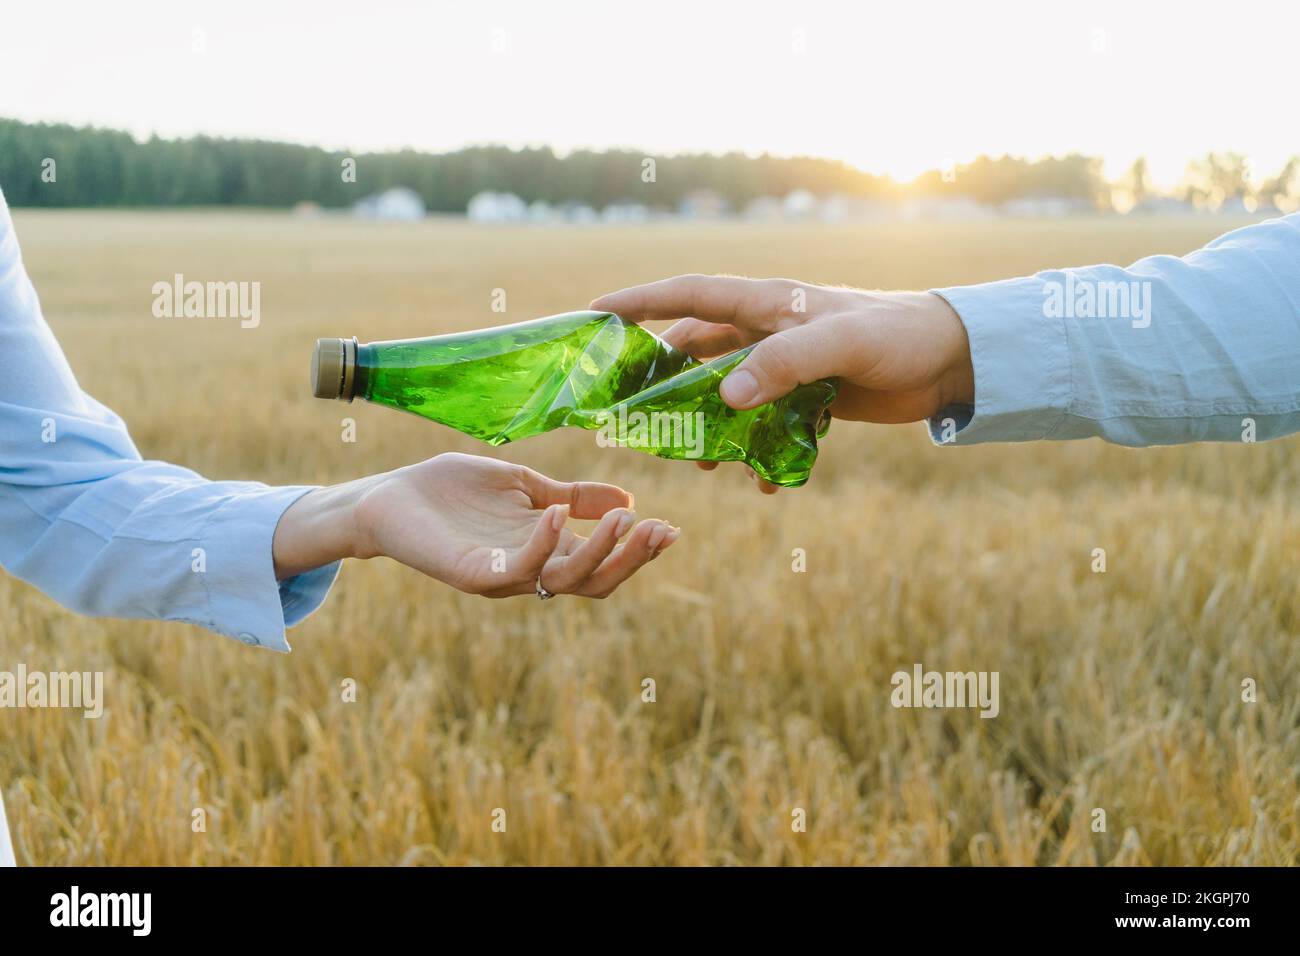 Hand of man passing crumpled plastic bottle to woman at field Stock Photo